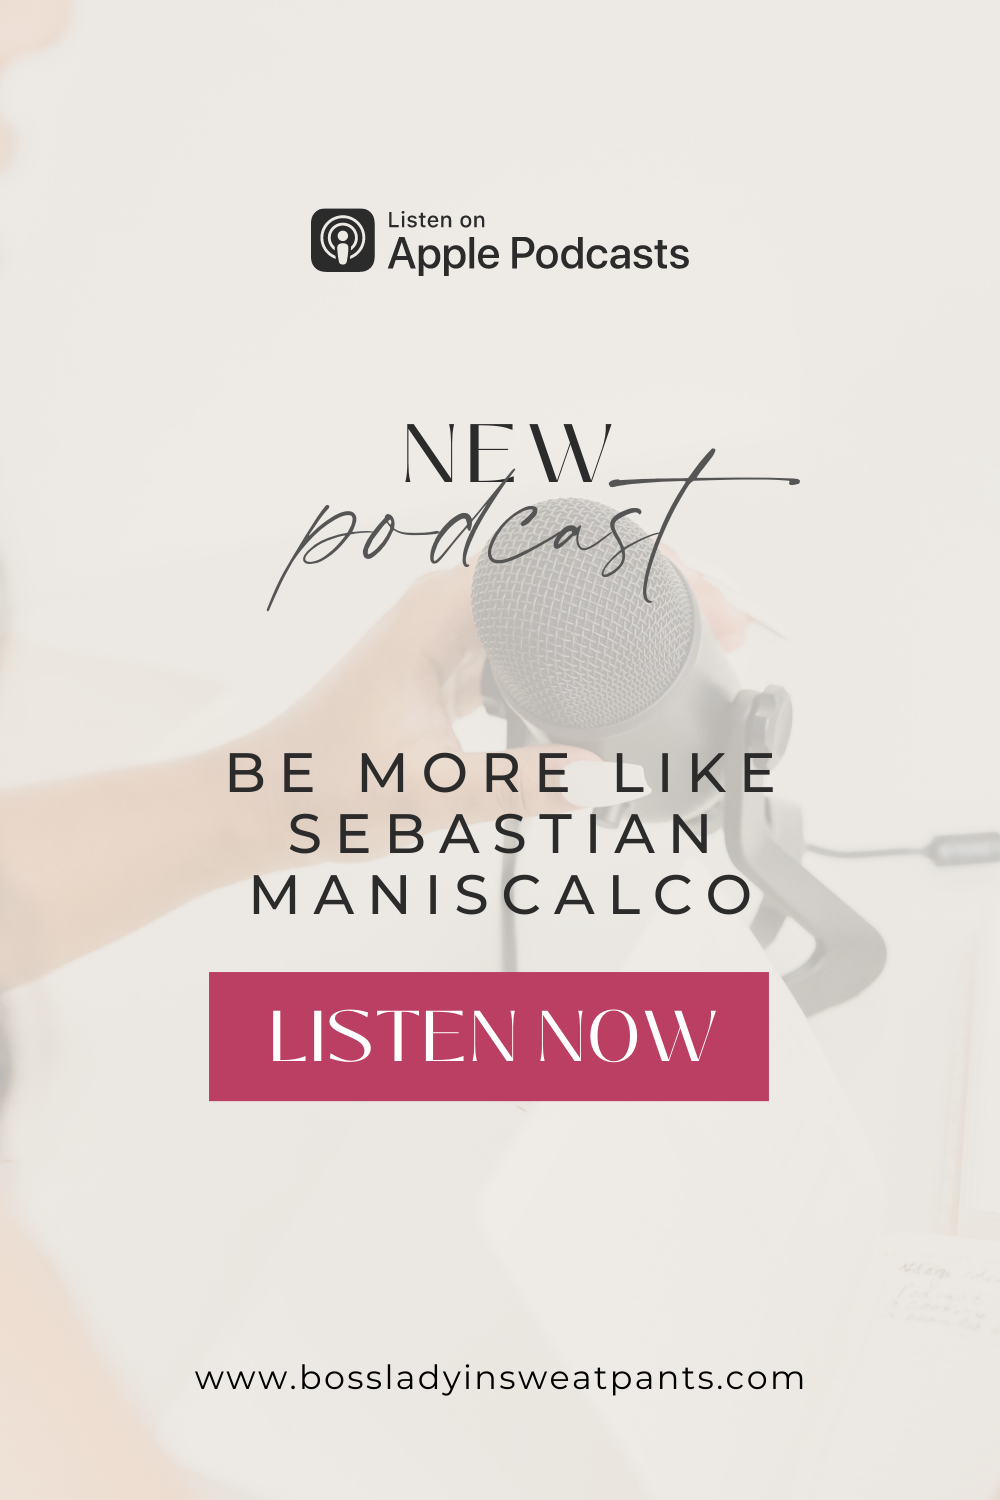 faded photo of a microphone in the background. Text: new podcast: Be more like Sebastian maniscalco with a button that reads: listen now